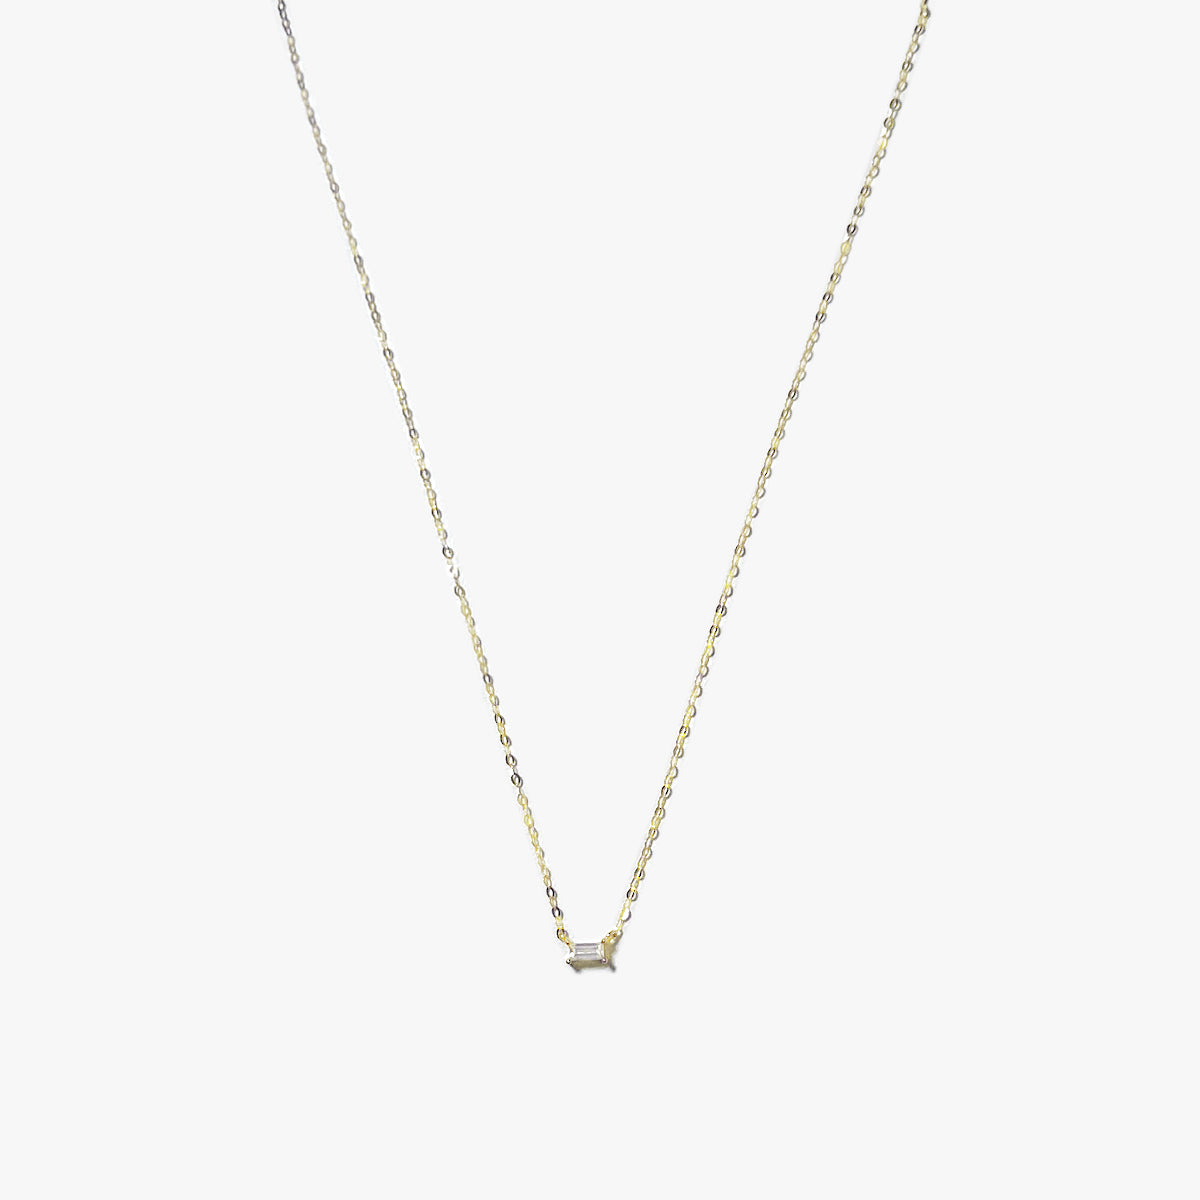 The Tiny Baguette Choker Necklace in Solid Gold